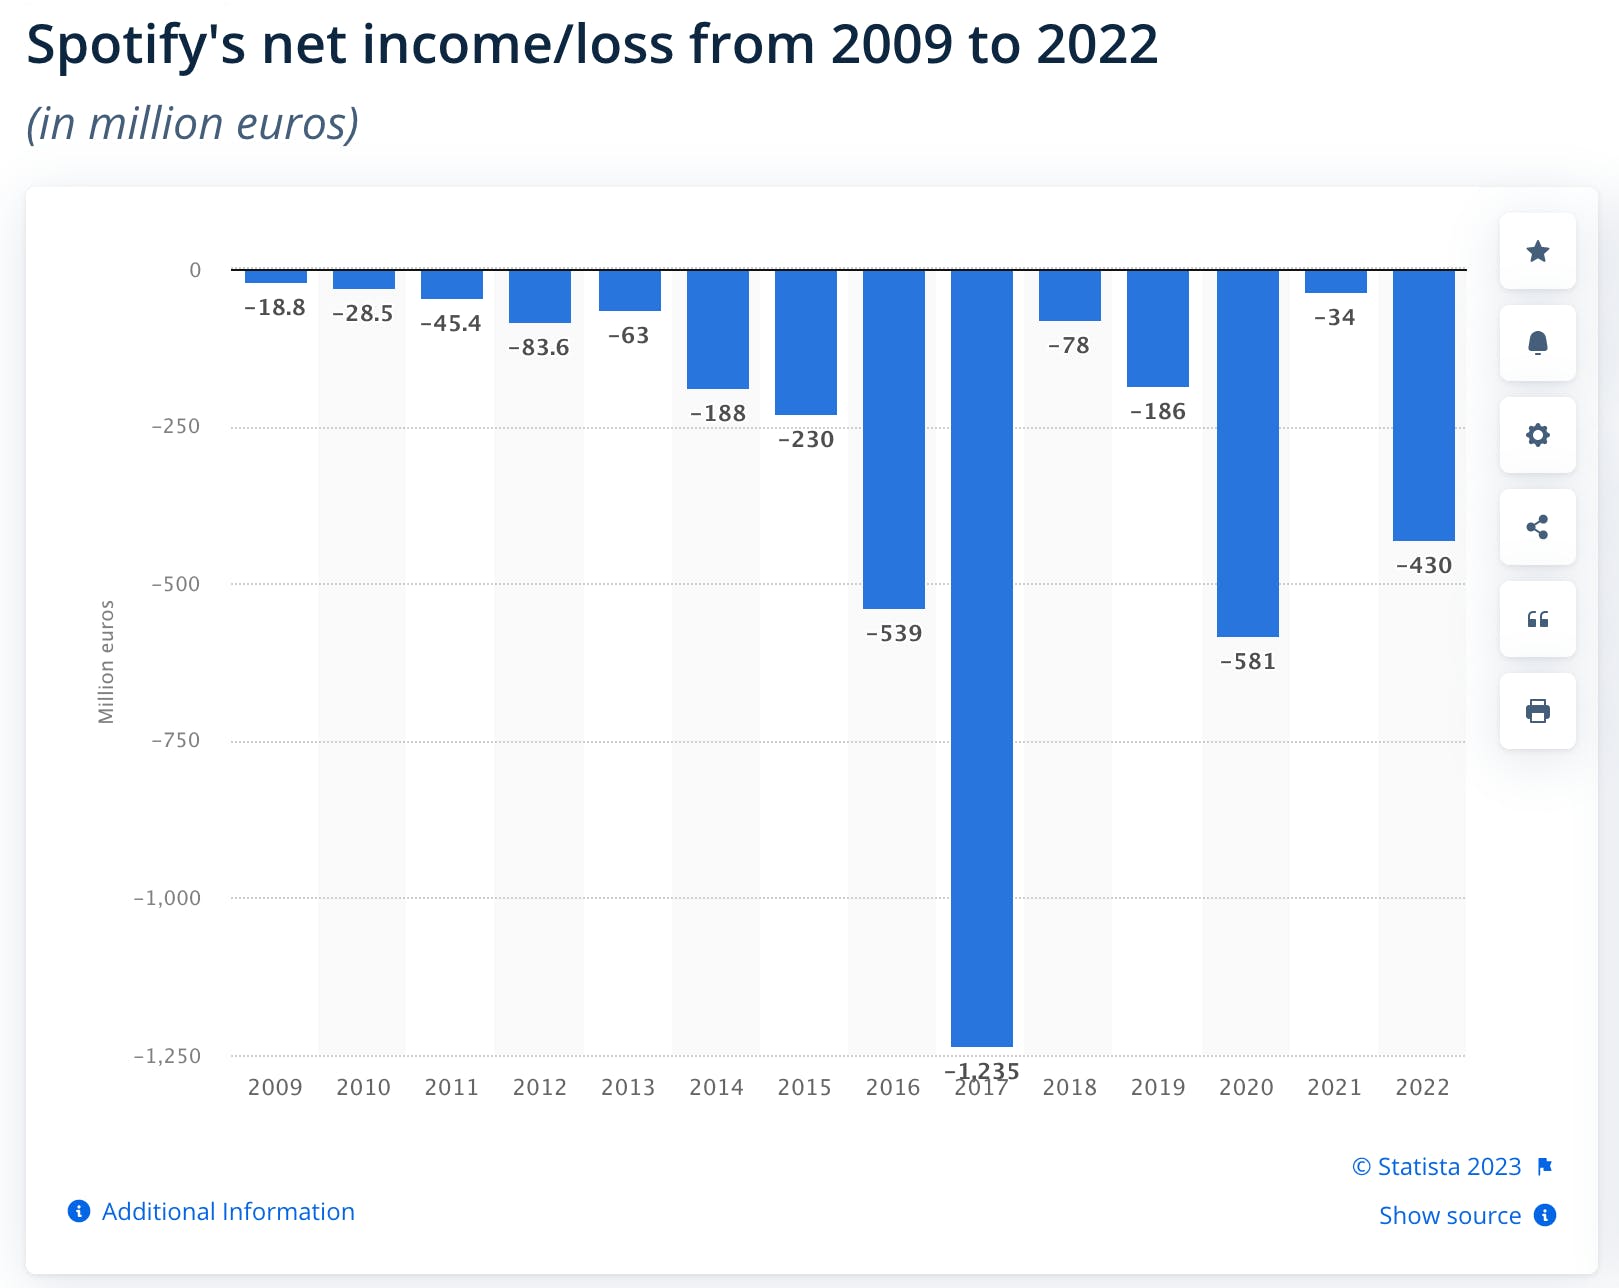 Spotify profits and loss from 2009 to 2022